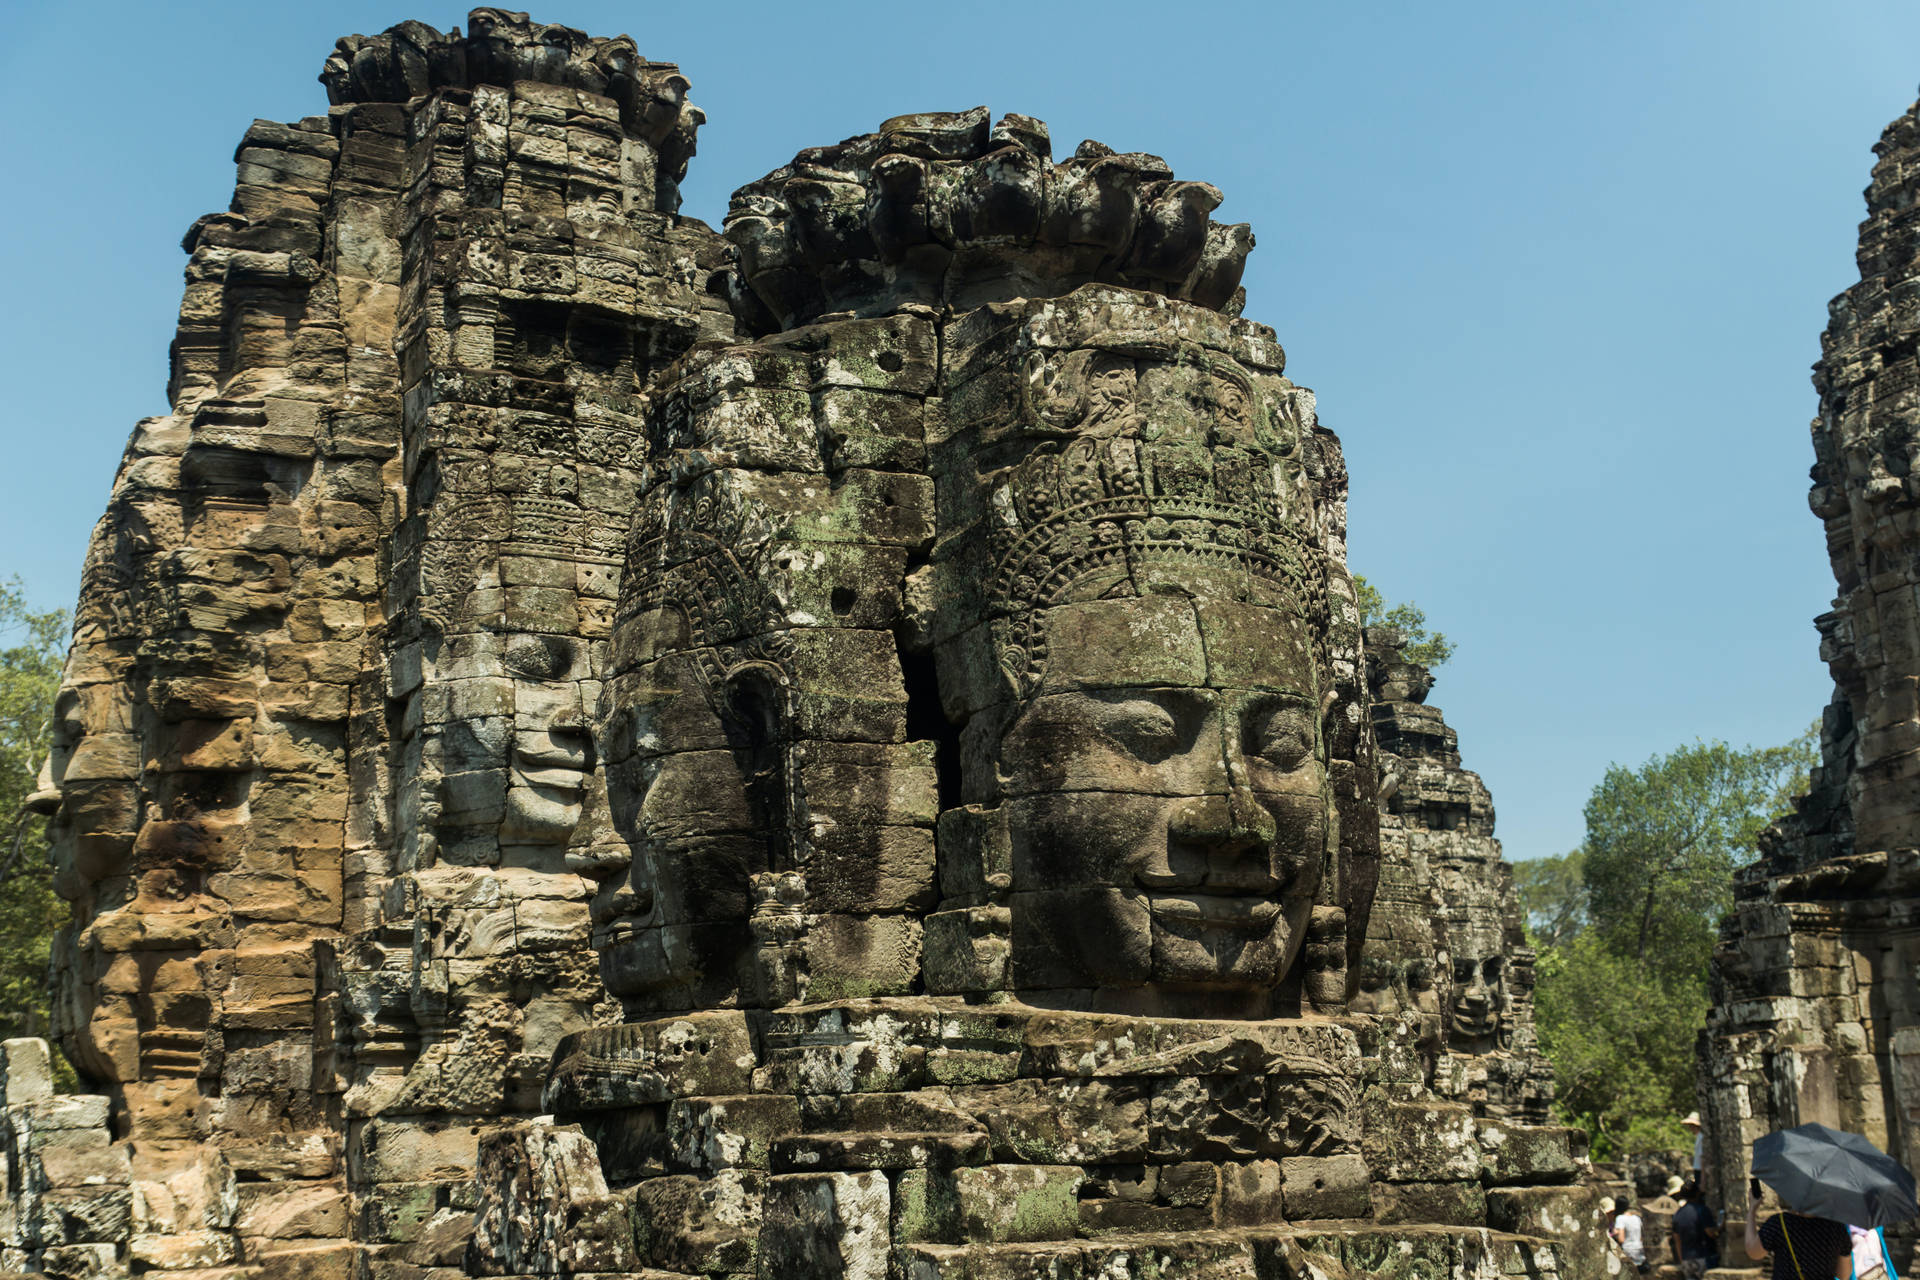 Caption: Majestic Stone Faces In Angkor Wat, Cambodia